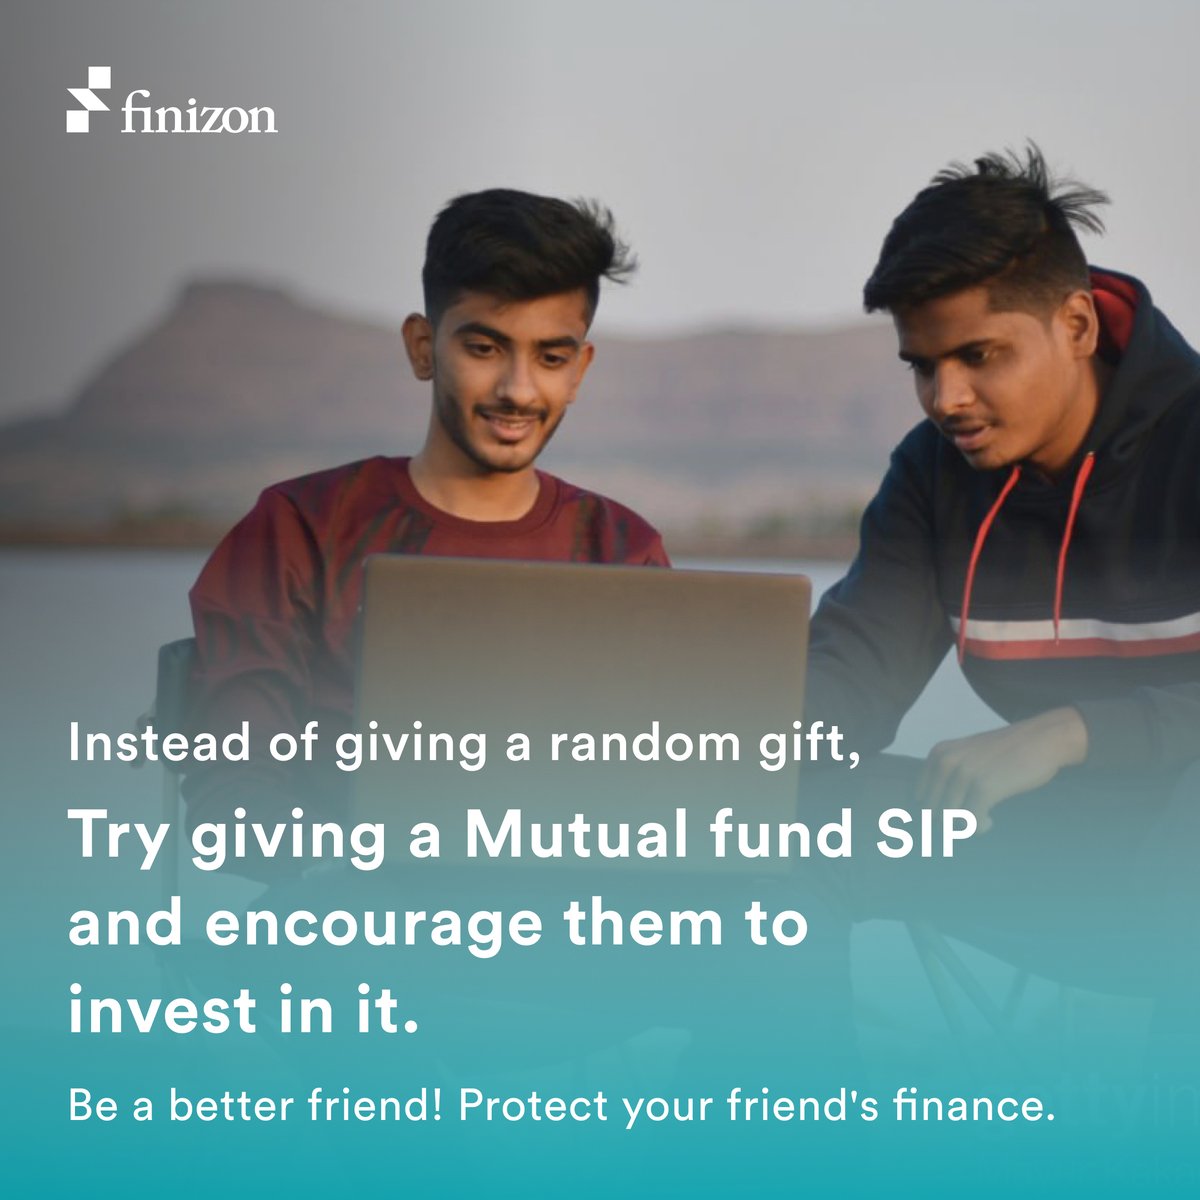 Introduce your friends and family to the habit of investing for the long term/Short term by gifting them a SIP. 

#mutualfund #mutualfunds #mutualfundssahihai #mutualfundinvestment #mutualfundsinvestment #mutualfundadvisor #mutualfundinvesting #mutualfundinvestments